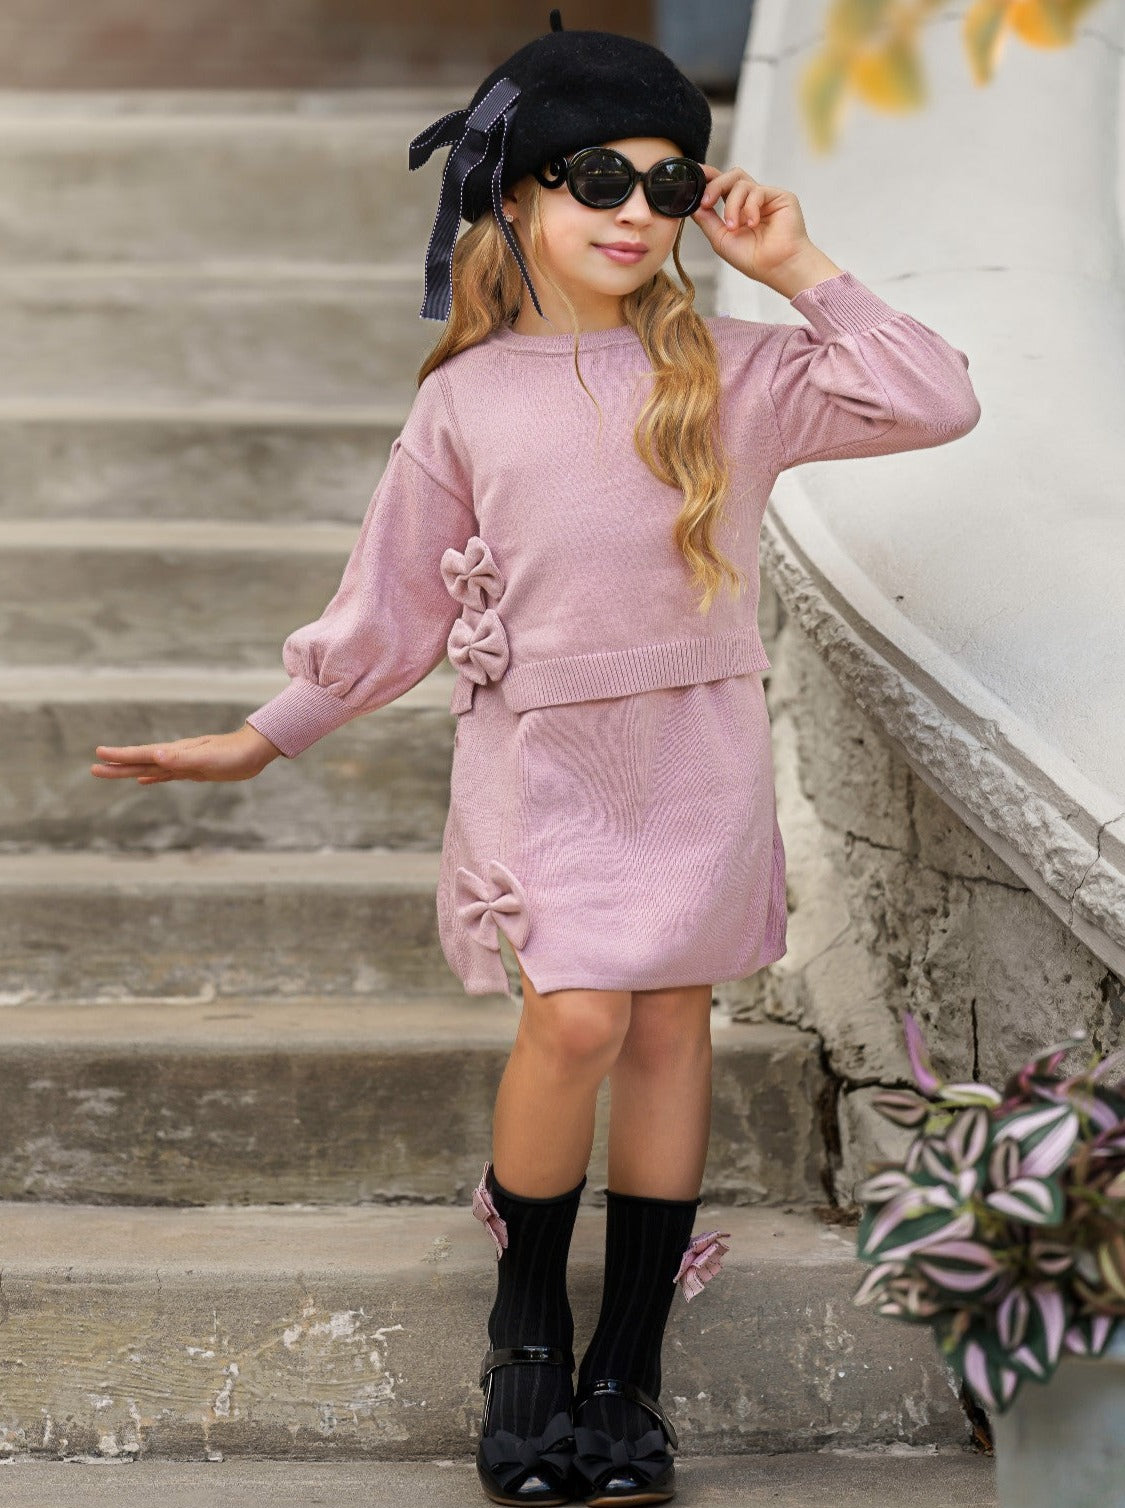 Preppy Chic Clothes | Bowknot Sweater & Skirt Set | Mia Belle Girls